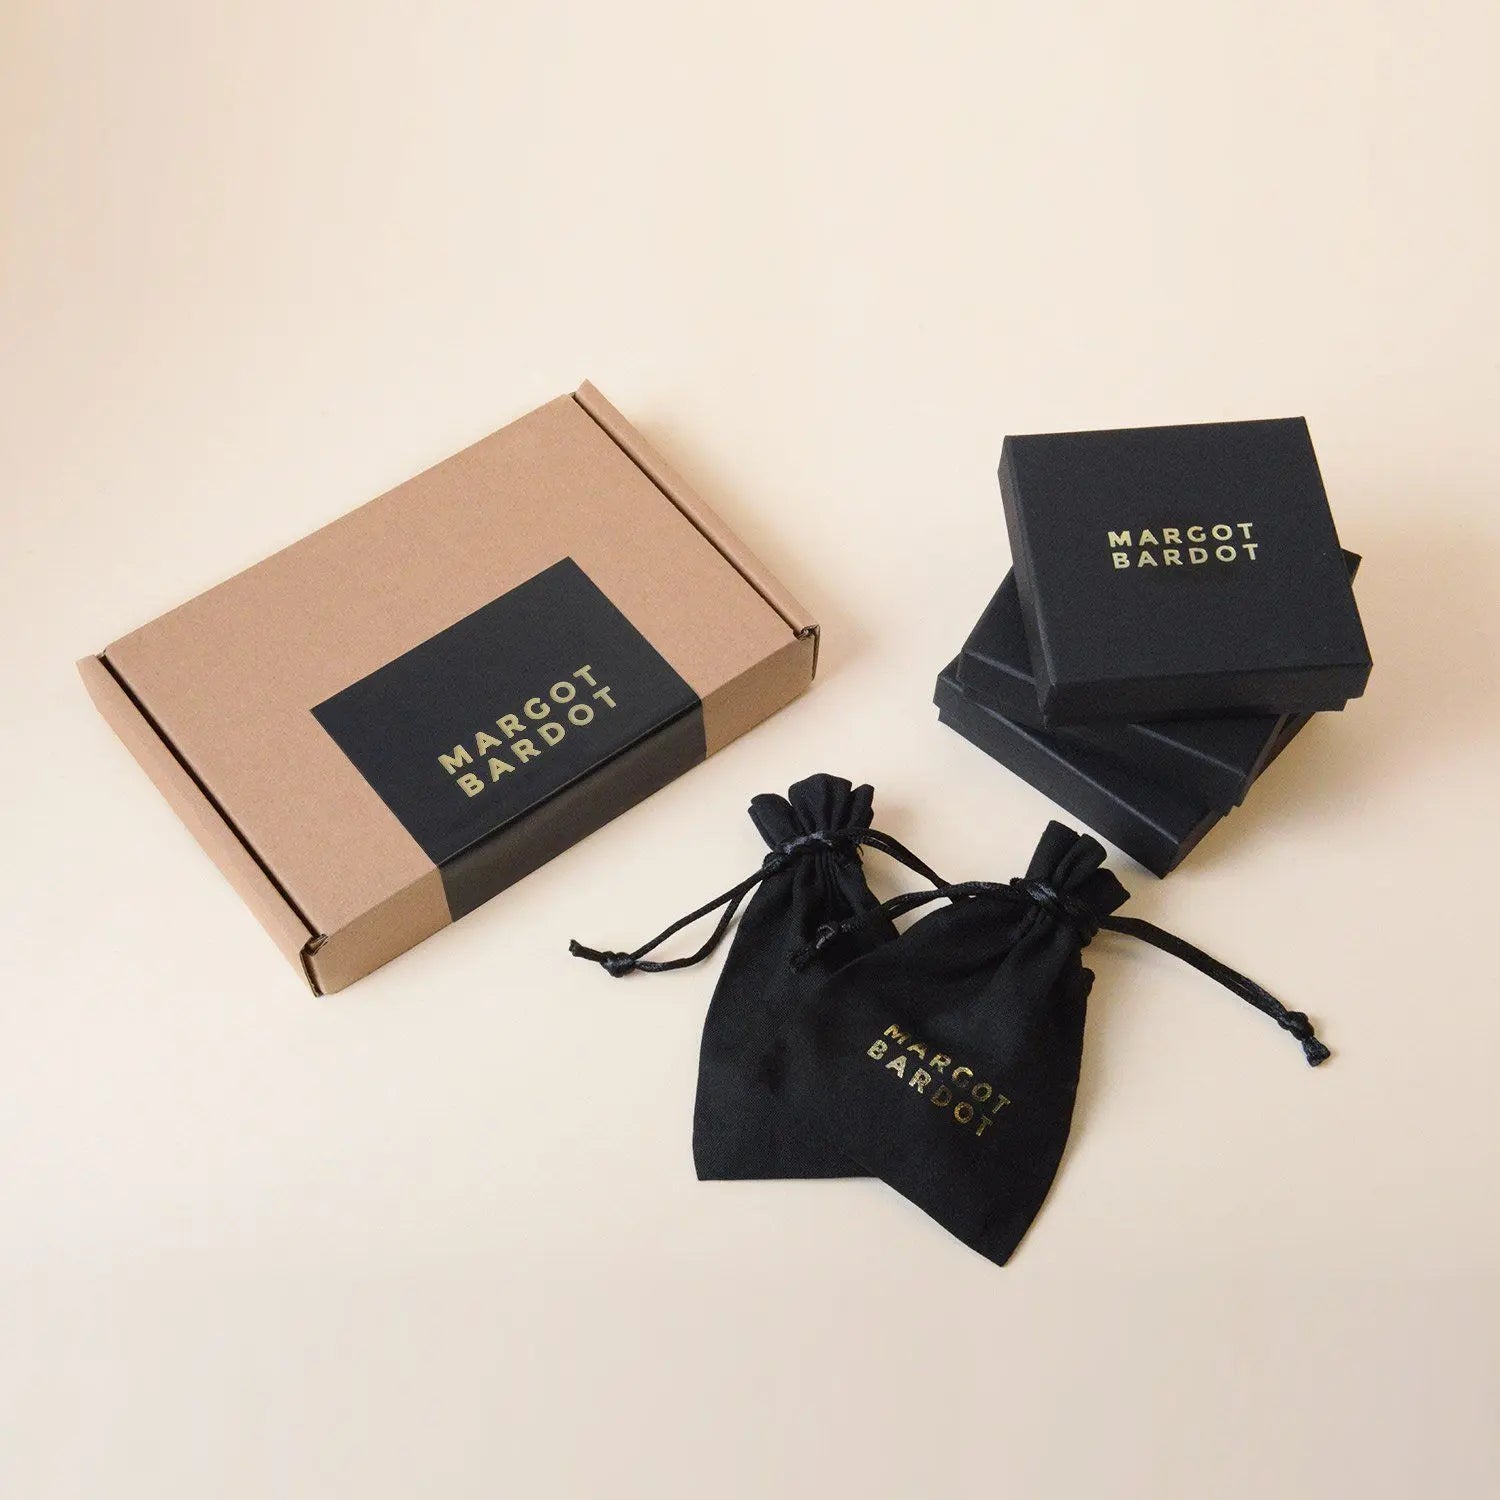 Personalized box and packaging of Party Love Earrings - Gold Margot Bardot Online